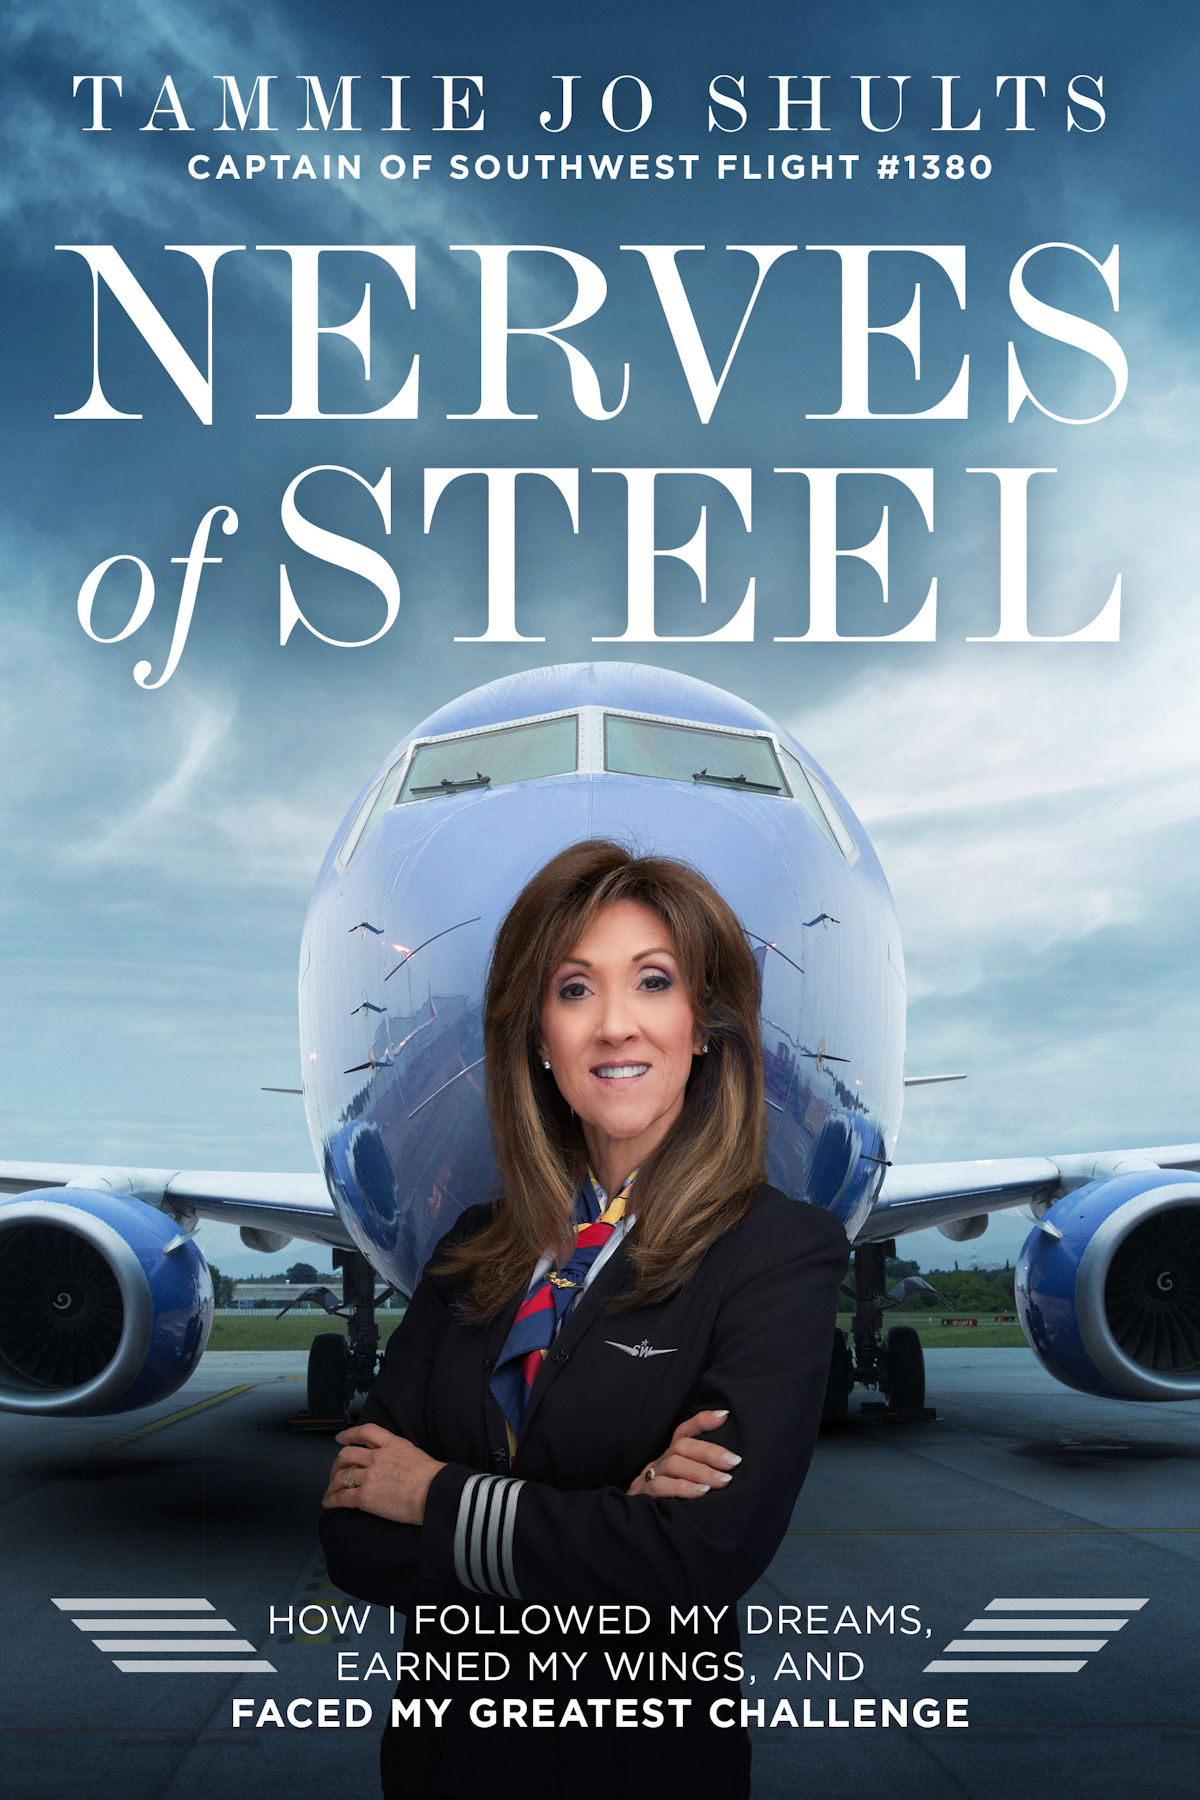 Tammie Jo Shults, Captain of Southwest Flight #1380 Announces Book at